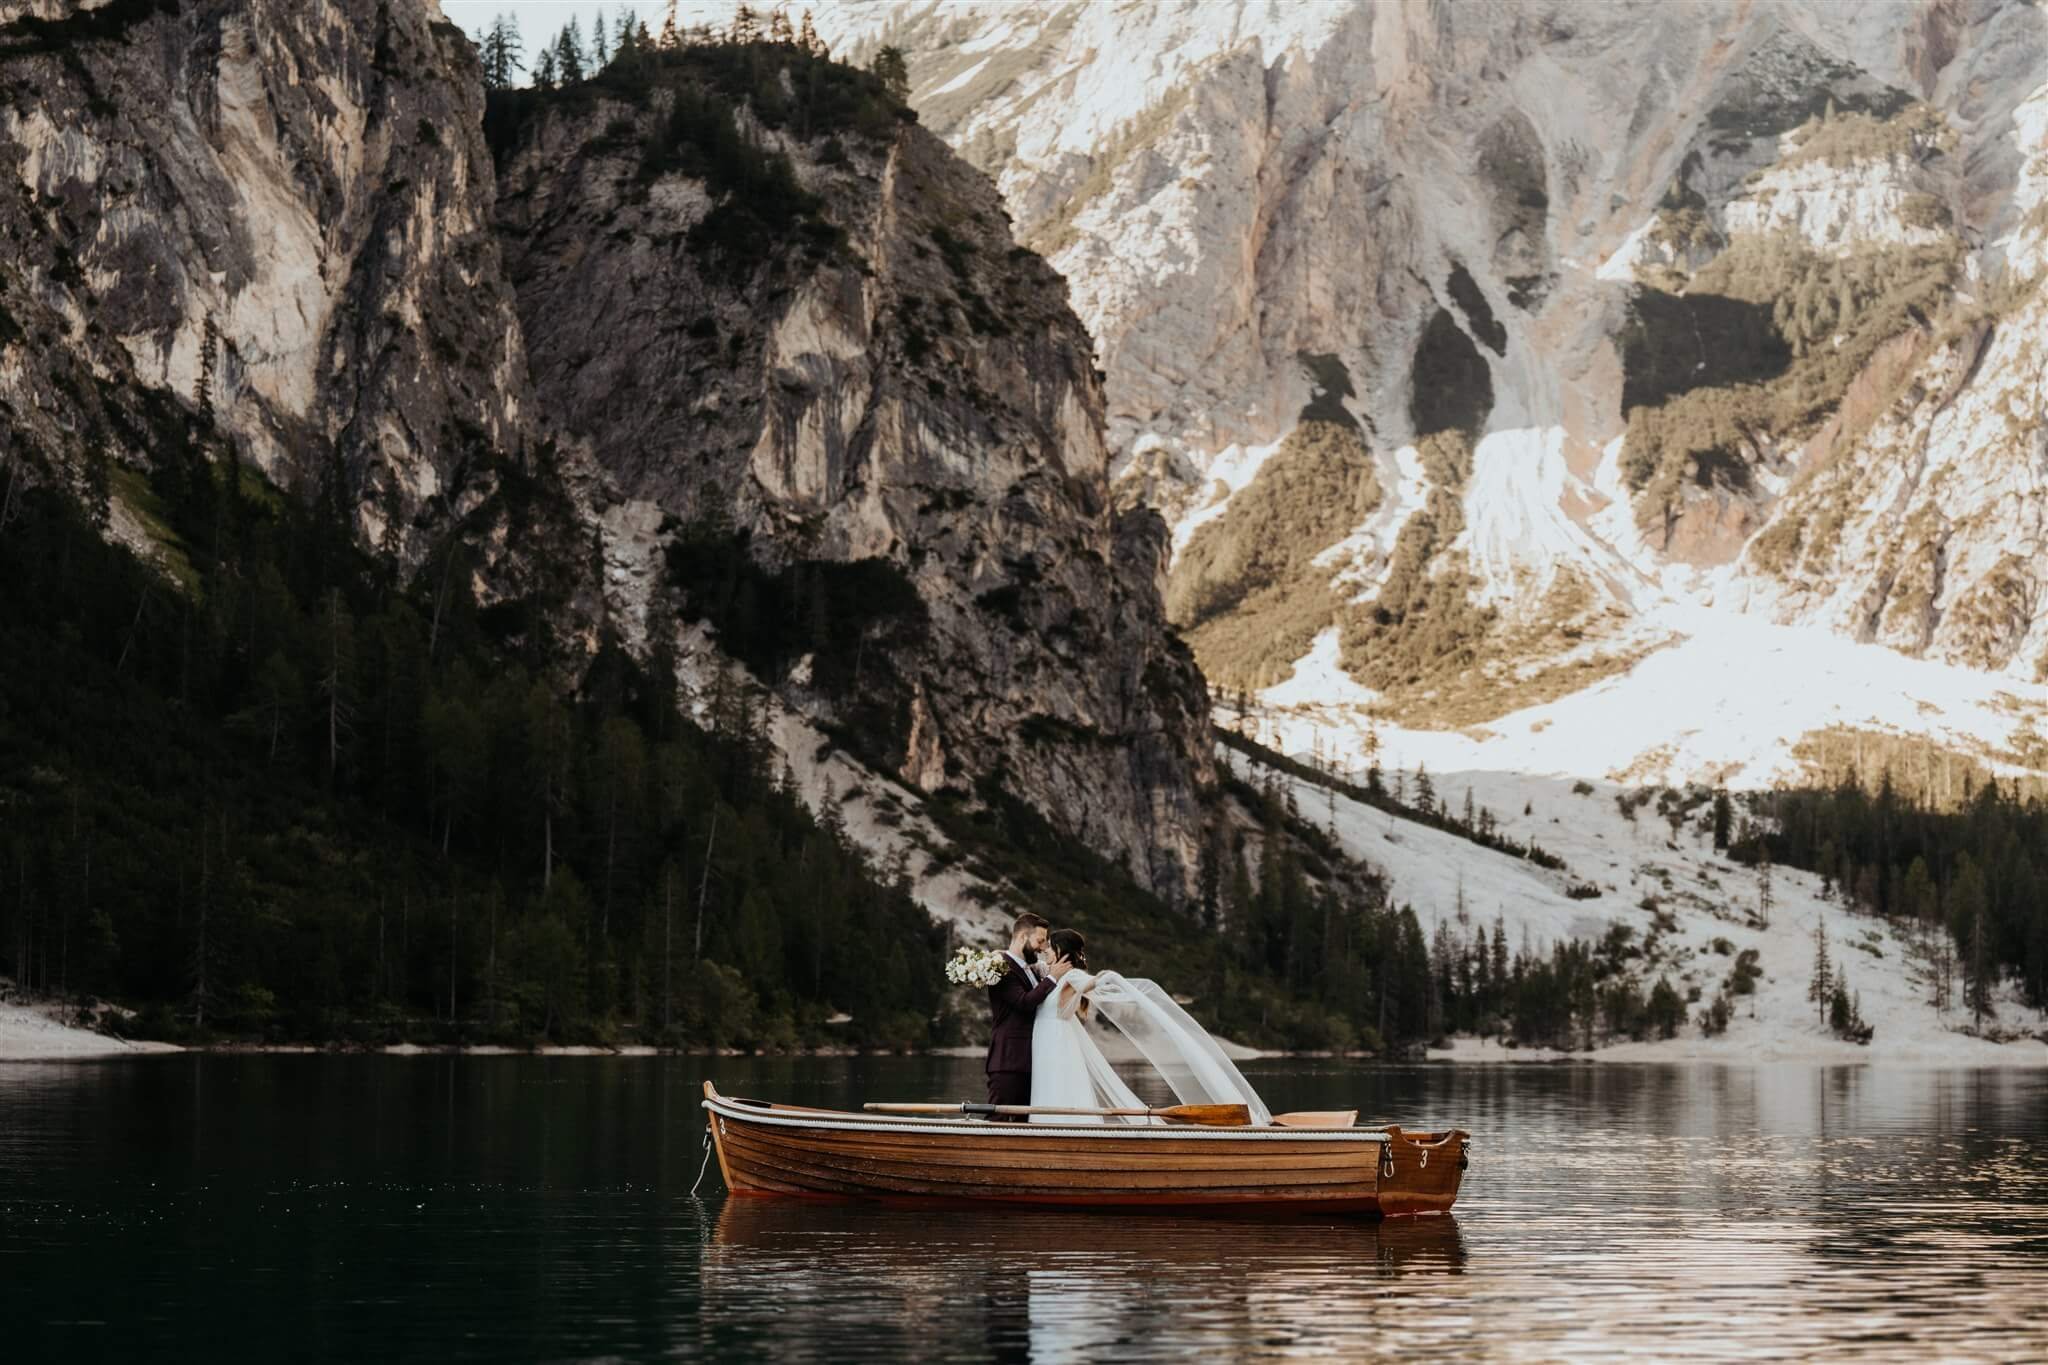 Bride and groom couple portraits at Lago di Braies vow renewal elopement